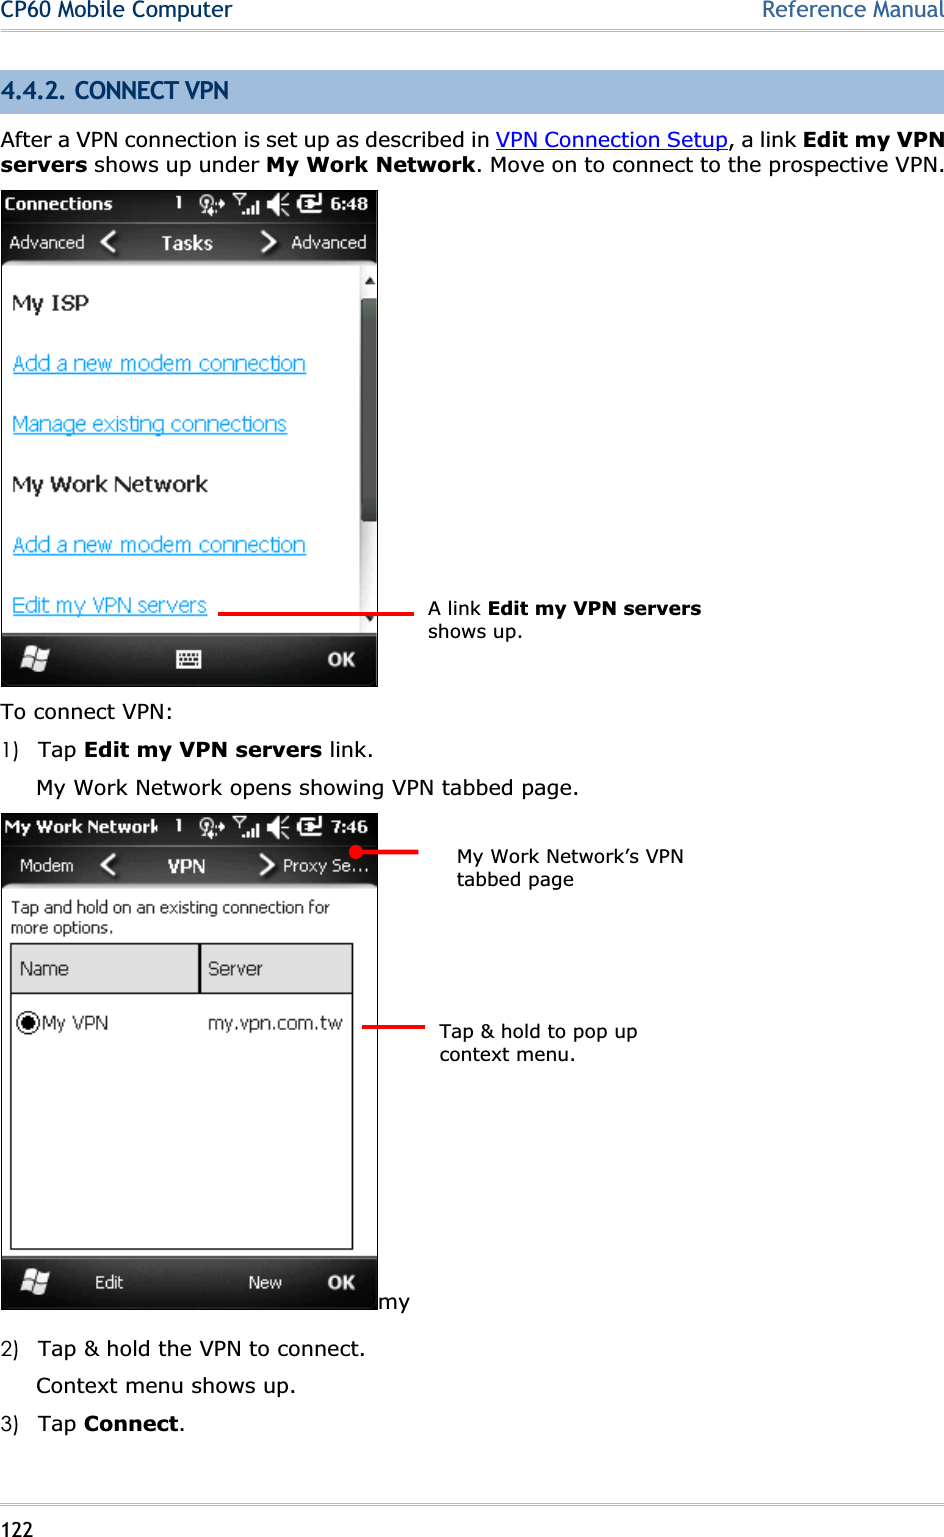 122CP60 Mobile Computer Reference Manual4.4.2. CONNECT VPN After a VPN connection is set up as described in VPN Connection Setup, a link Edit my VPN servers shows up under My Work Network. Move on to connect to the prospective VPN. To connect VPN: 1) Tap Edit my VPN servers link. My Work Network opens showing VPN tabbed page. my2) Tap &amp; hold the VPN to connect. Context menu shows up. 3) Tap Connect.A link Edit my VPN serversshows up. My Work Network’s VPN tabbed page Tap &amp; hold to pop up context menu. 